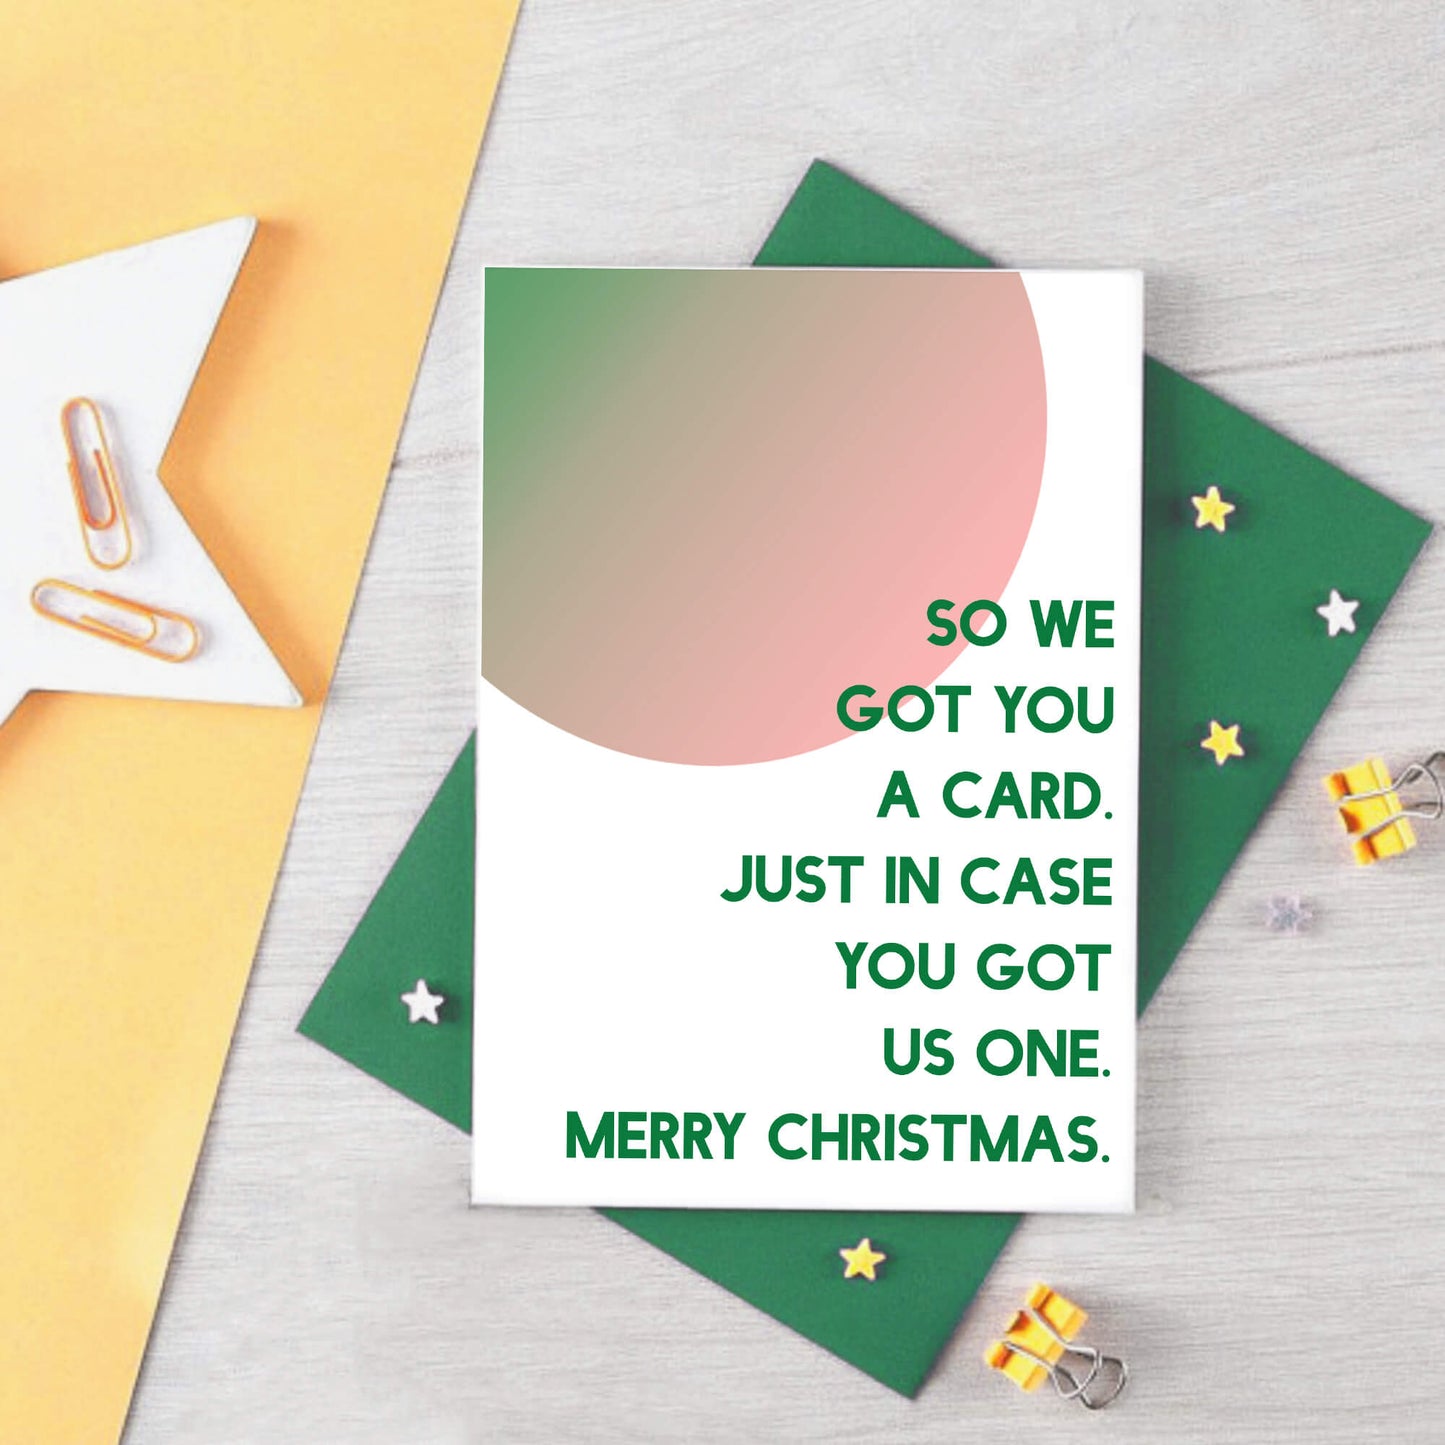 Christmas Card by SixElevenCreations. Reads So we got you a card. Just in case you got us one. Merry Christmas. Product Code SEC0048A6